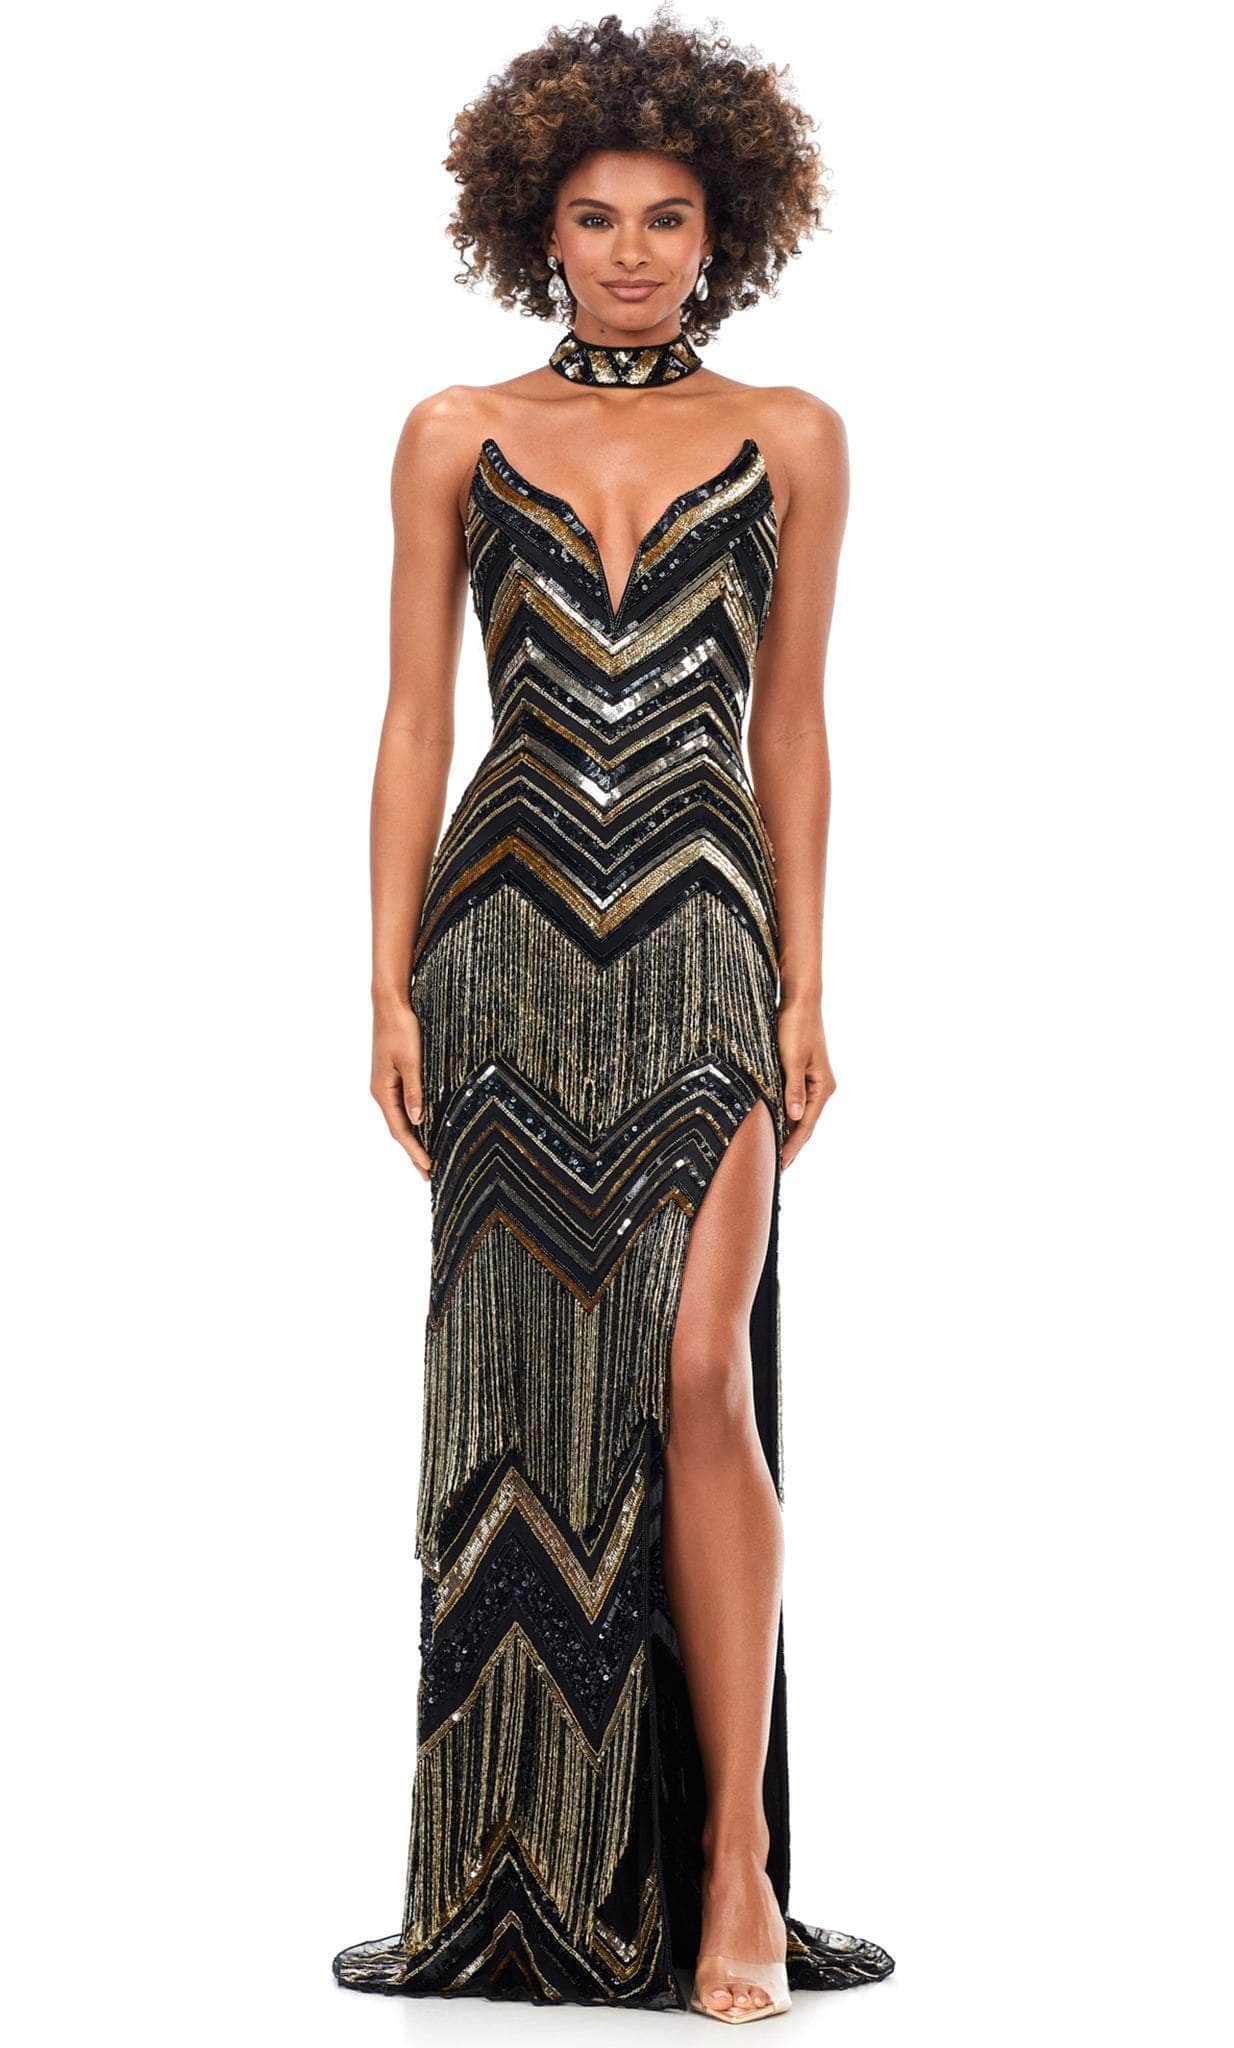 Ashley Lauren 11259 - Strapless With Collar Evening Gown Special Occasion Dress 0 / Gold/Black